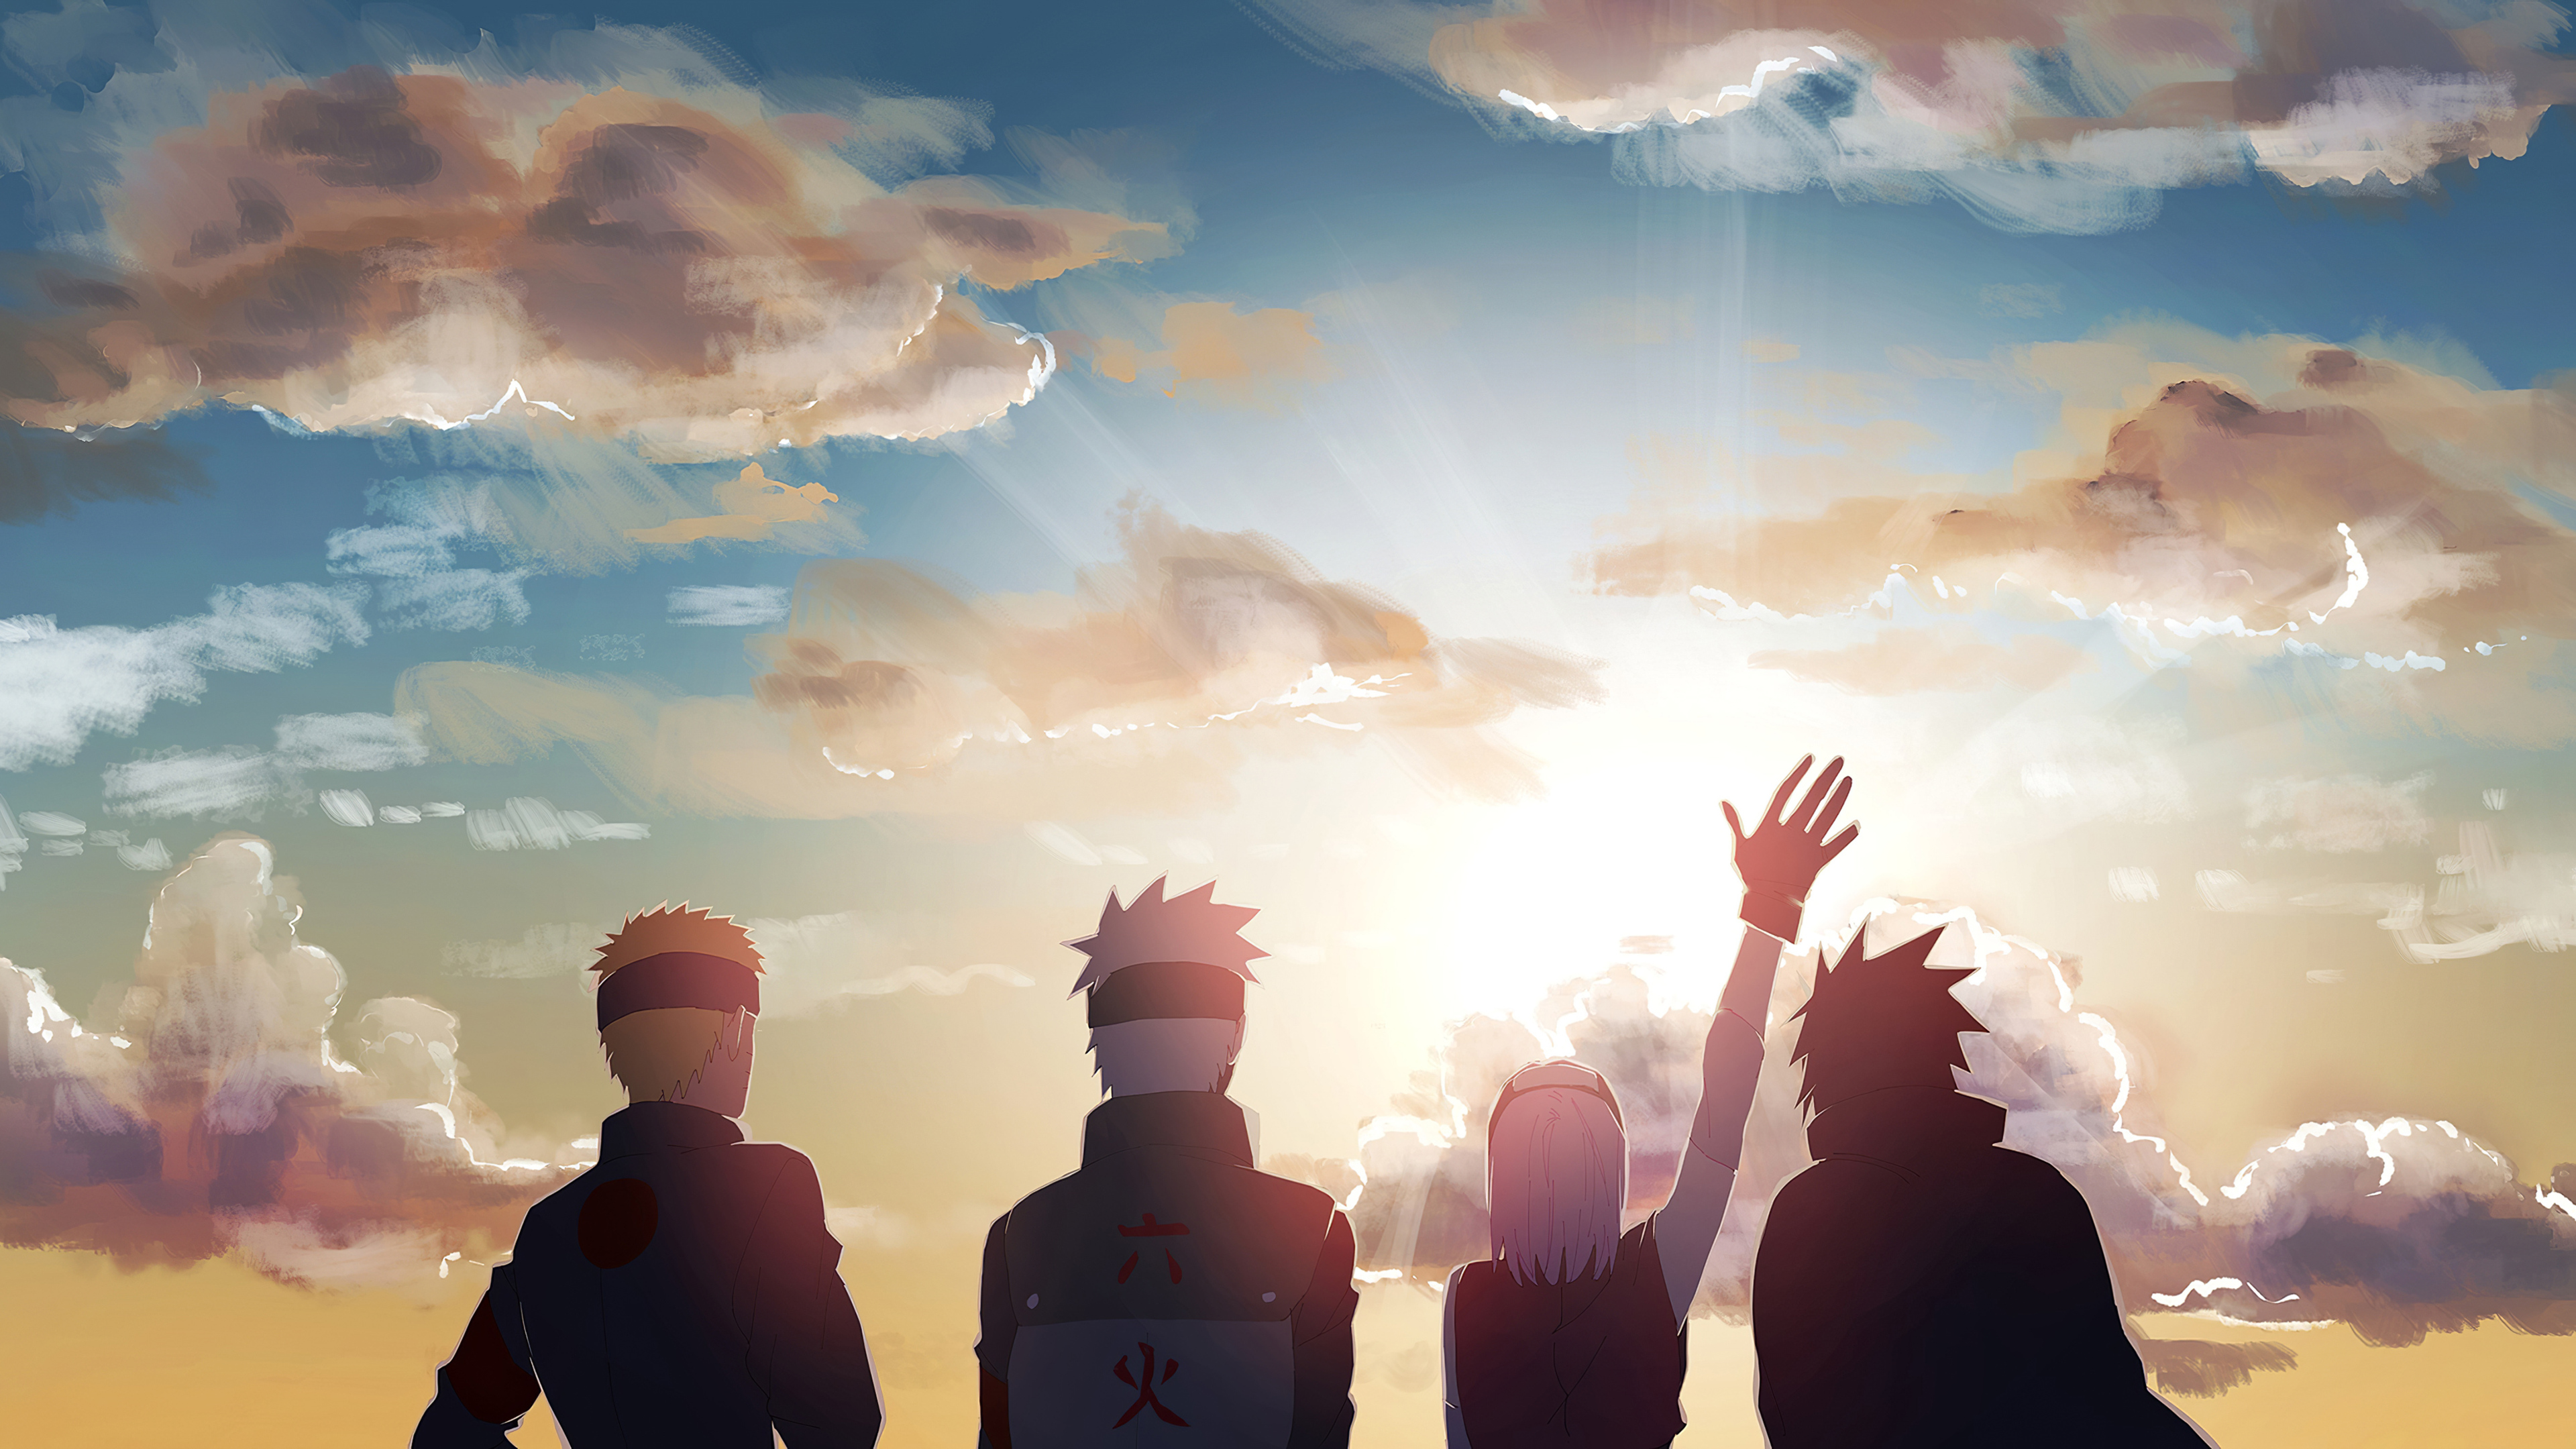 3840x2160 Naruto Anime Art 4k 4k HD 4k Wallpapers, Images, Backgrounds